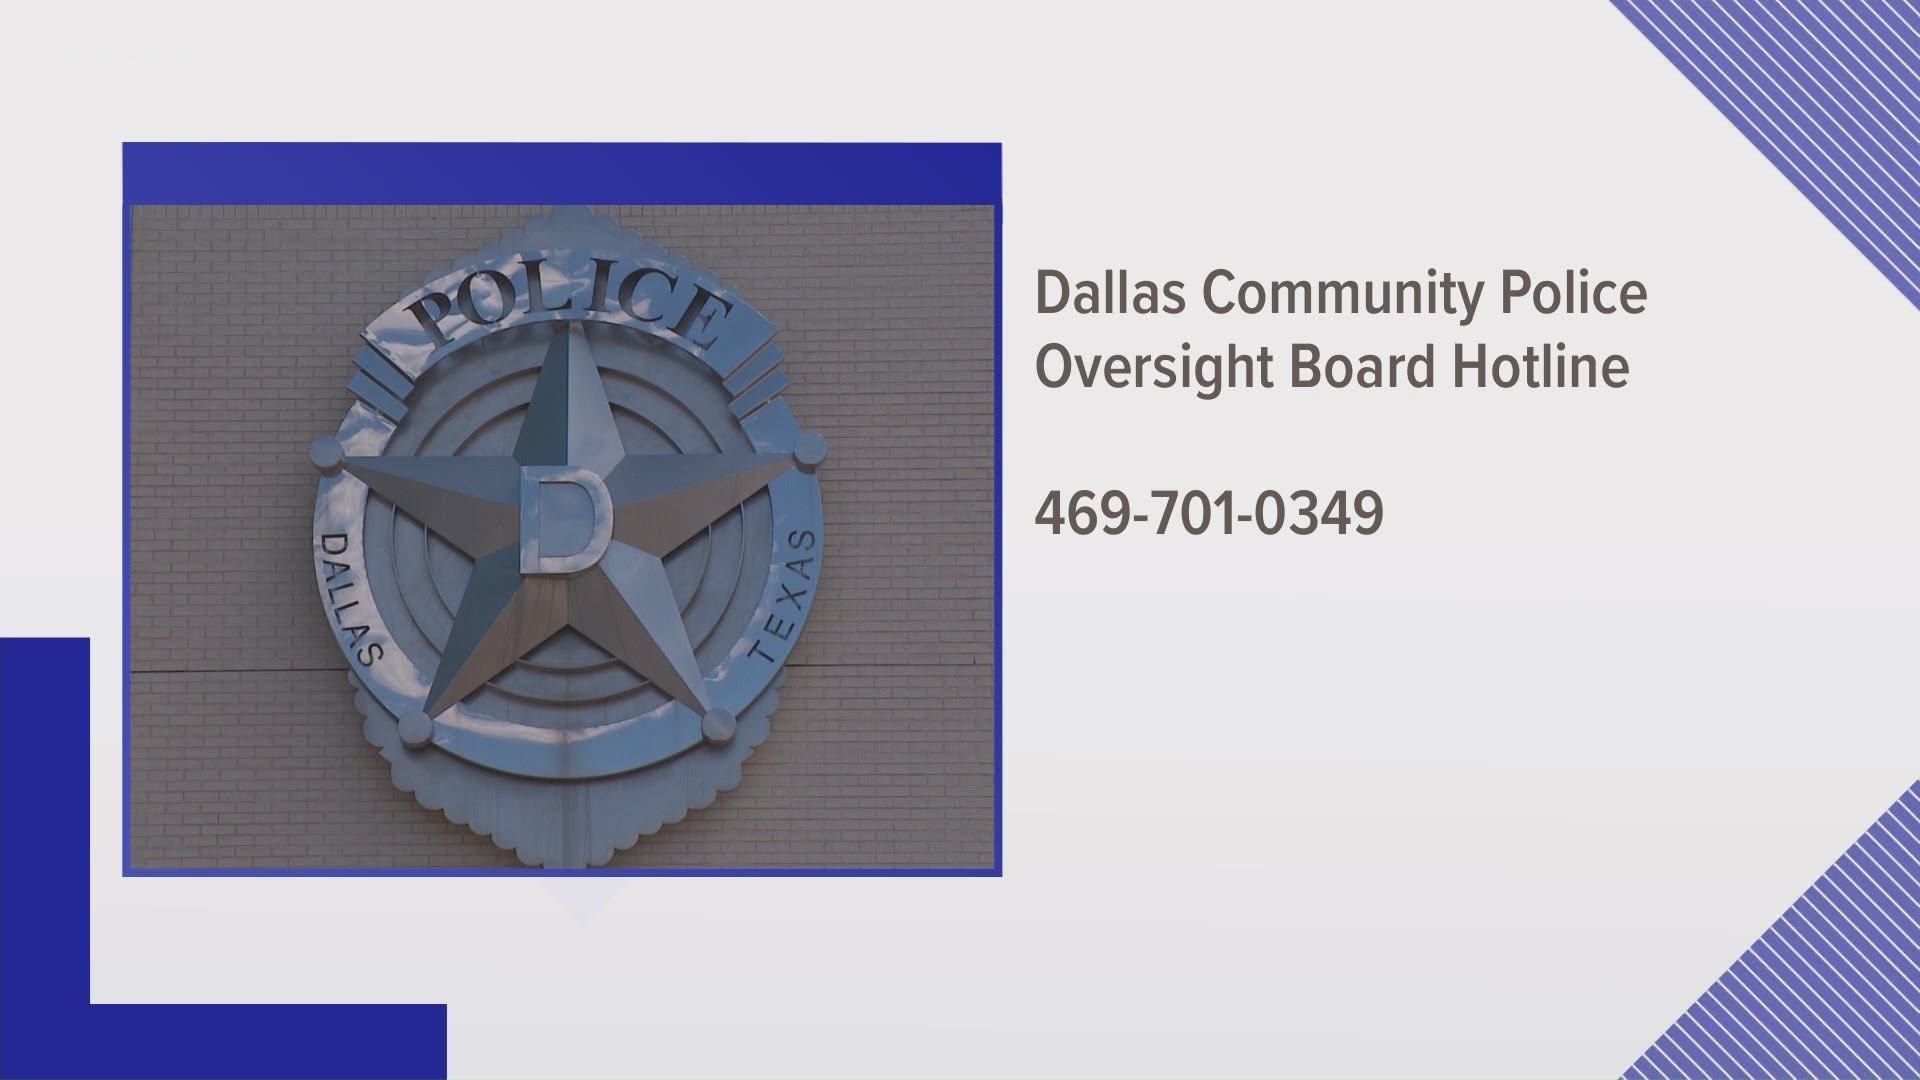 Board monitor Tonya McClary says she has received at least 50 complaints over the handling of protests in Dallas